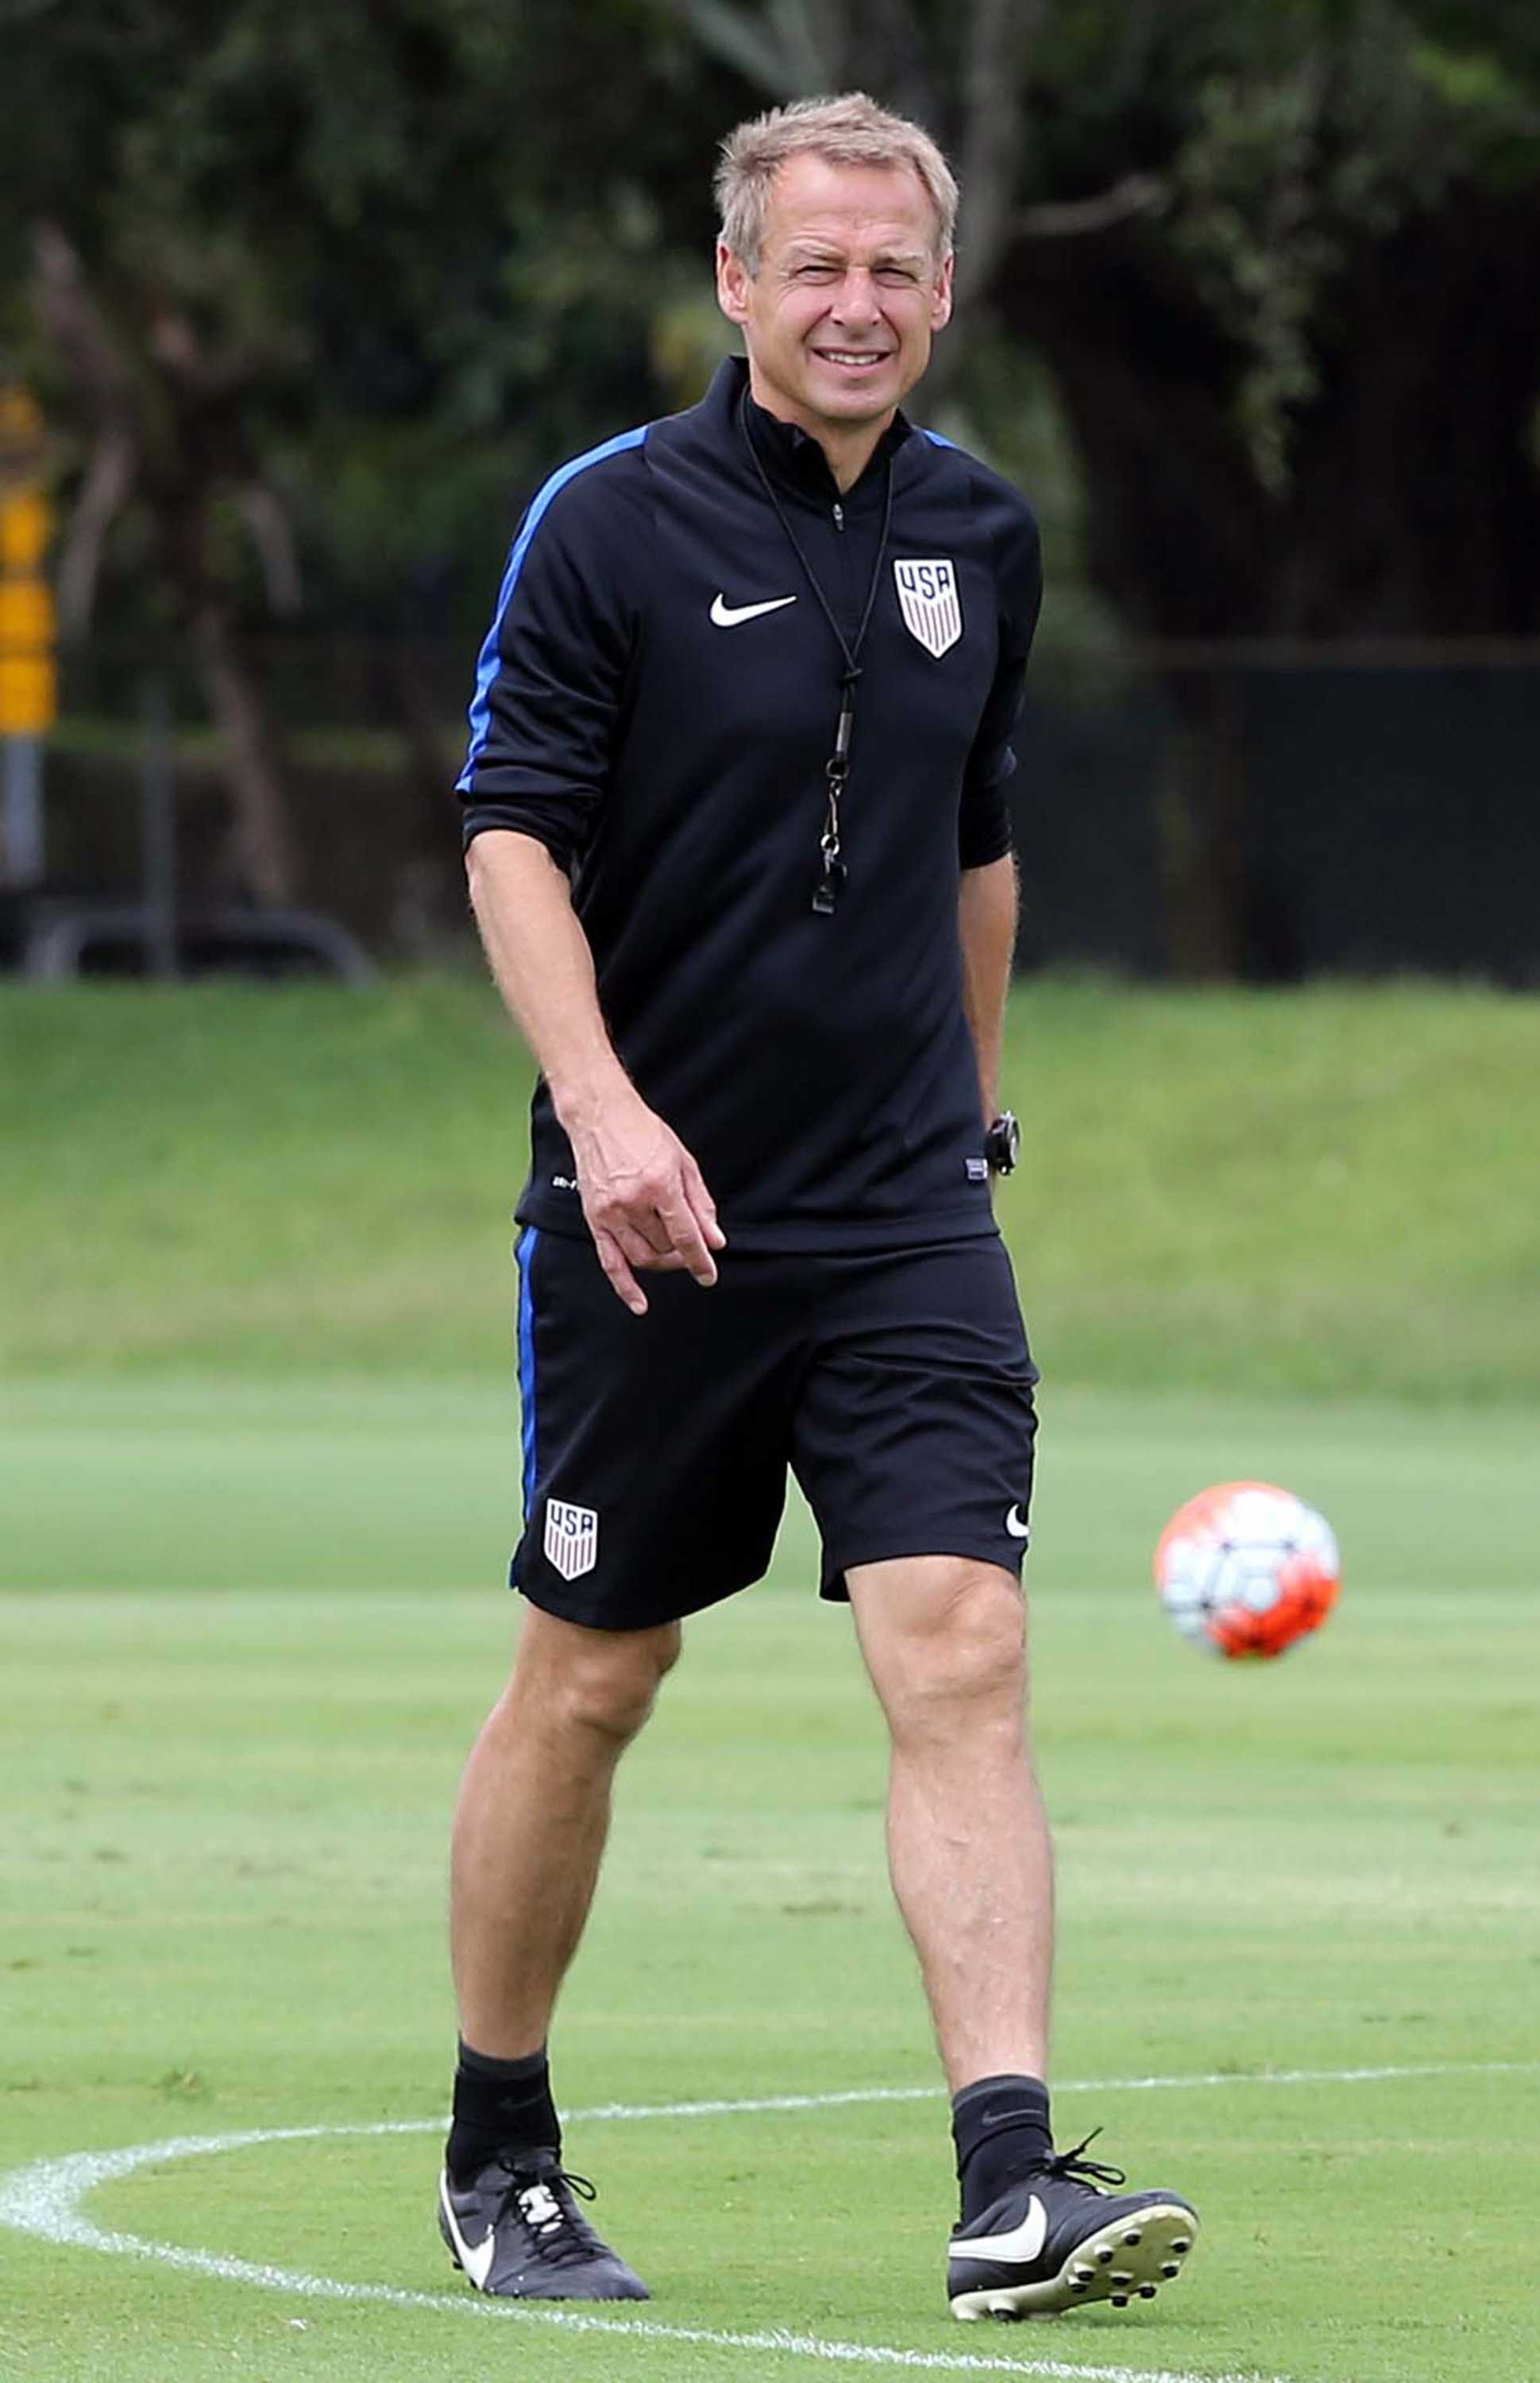 United States national team head coach Jurgen Klinsmann during a training session on Tuesday, May 17, 2016, at Barry University in Miami as the team prepares for a friendly against Puerto Rico on May 22 in Bayamon, P.R. (Pedro Portal/Miami Herald/TNS)